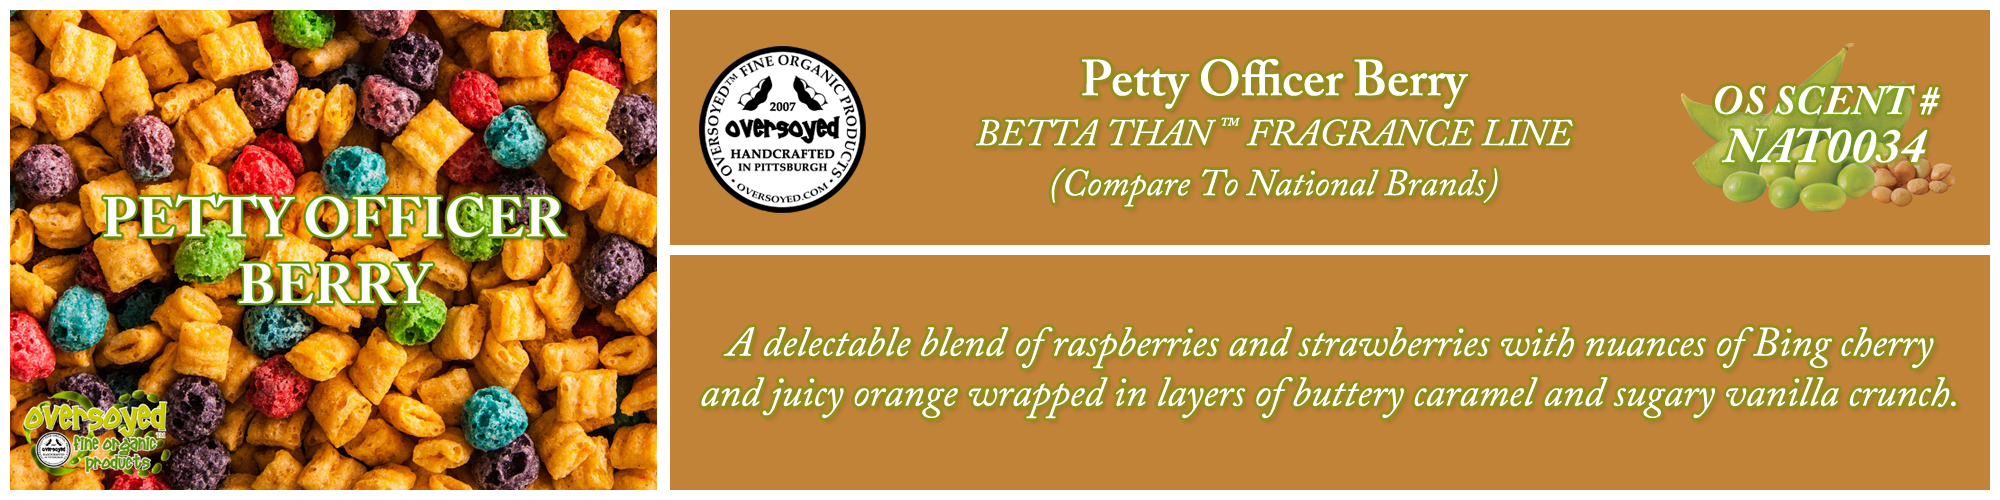 Petty Officer Berry Handcrafted Products Collection